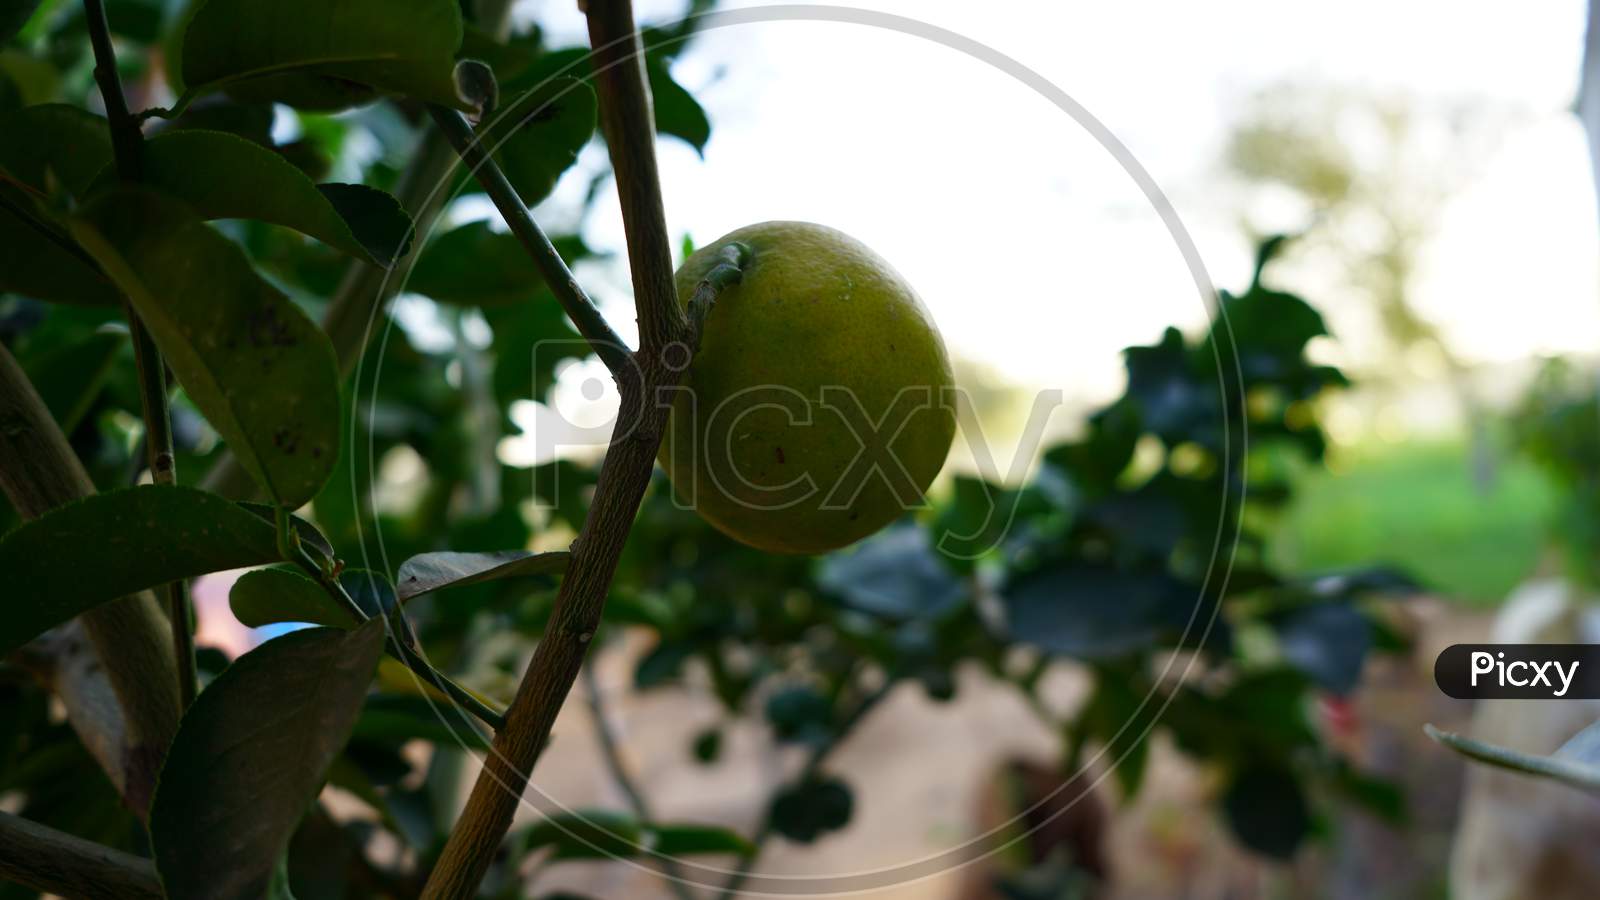 Alluring Light Yellow Lemon Fruit With Green Leaves, Flowering On The Branch. Summer Drinks Fruit With Attractive View And Source Of Vitamin C.